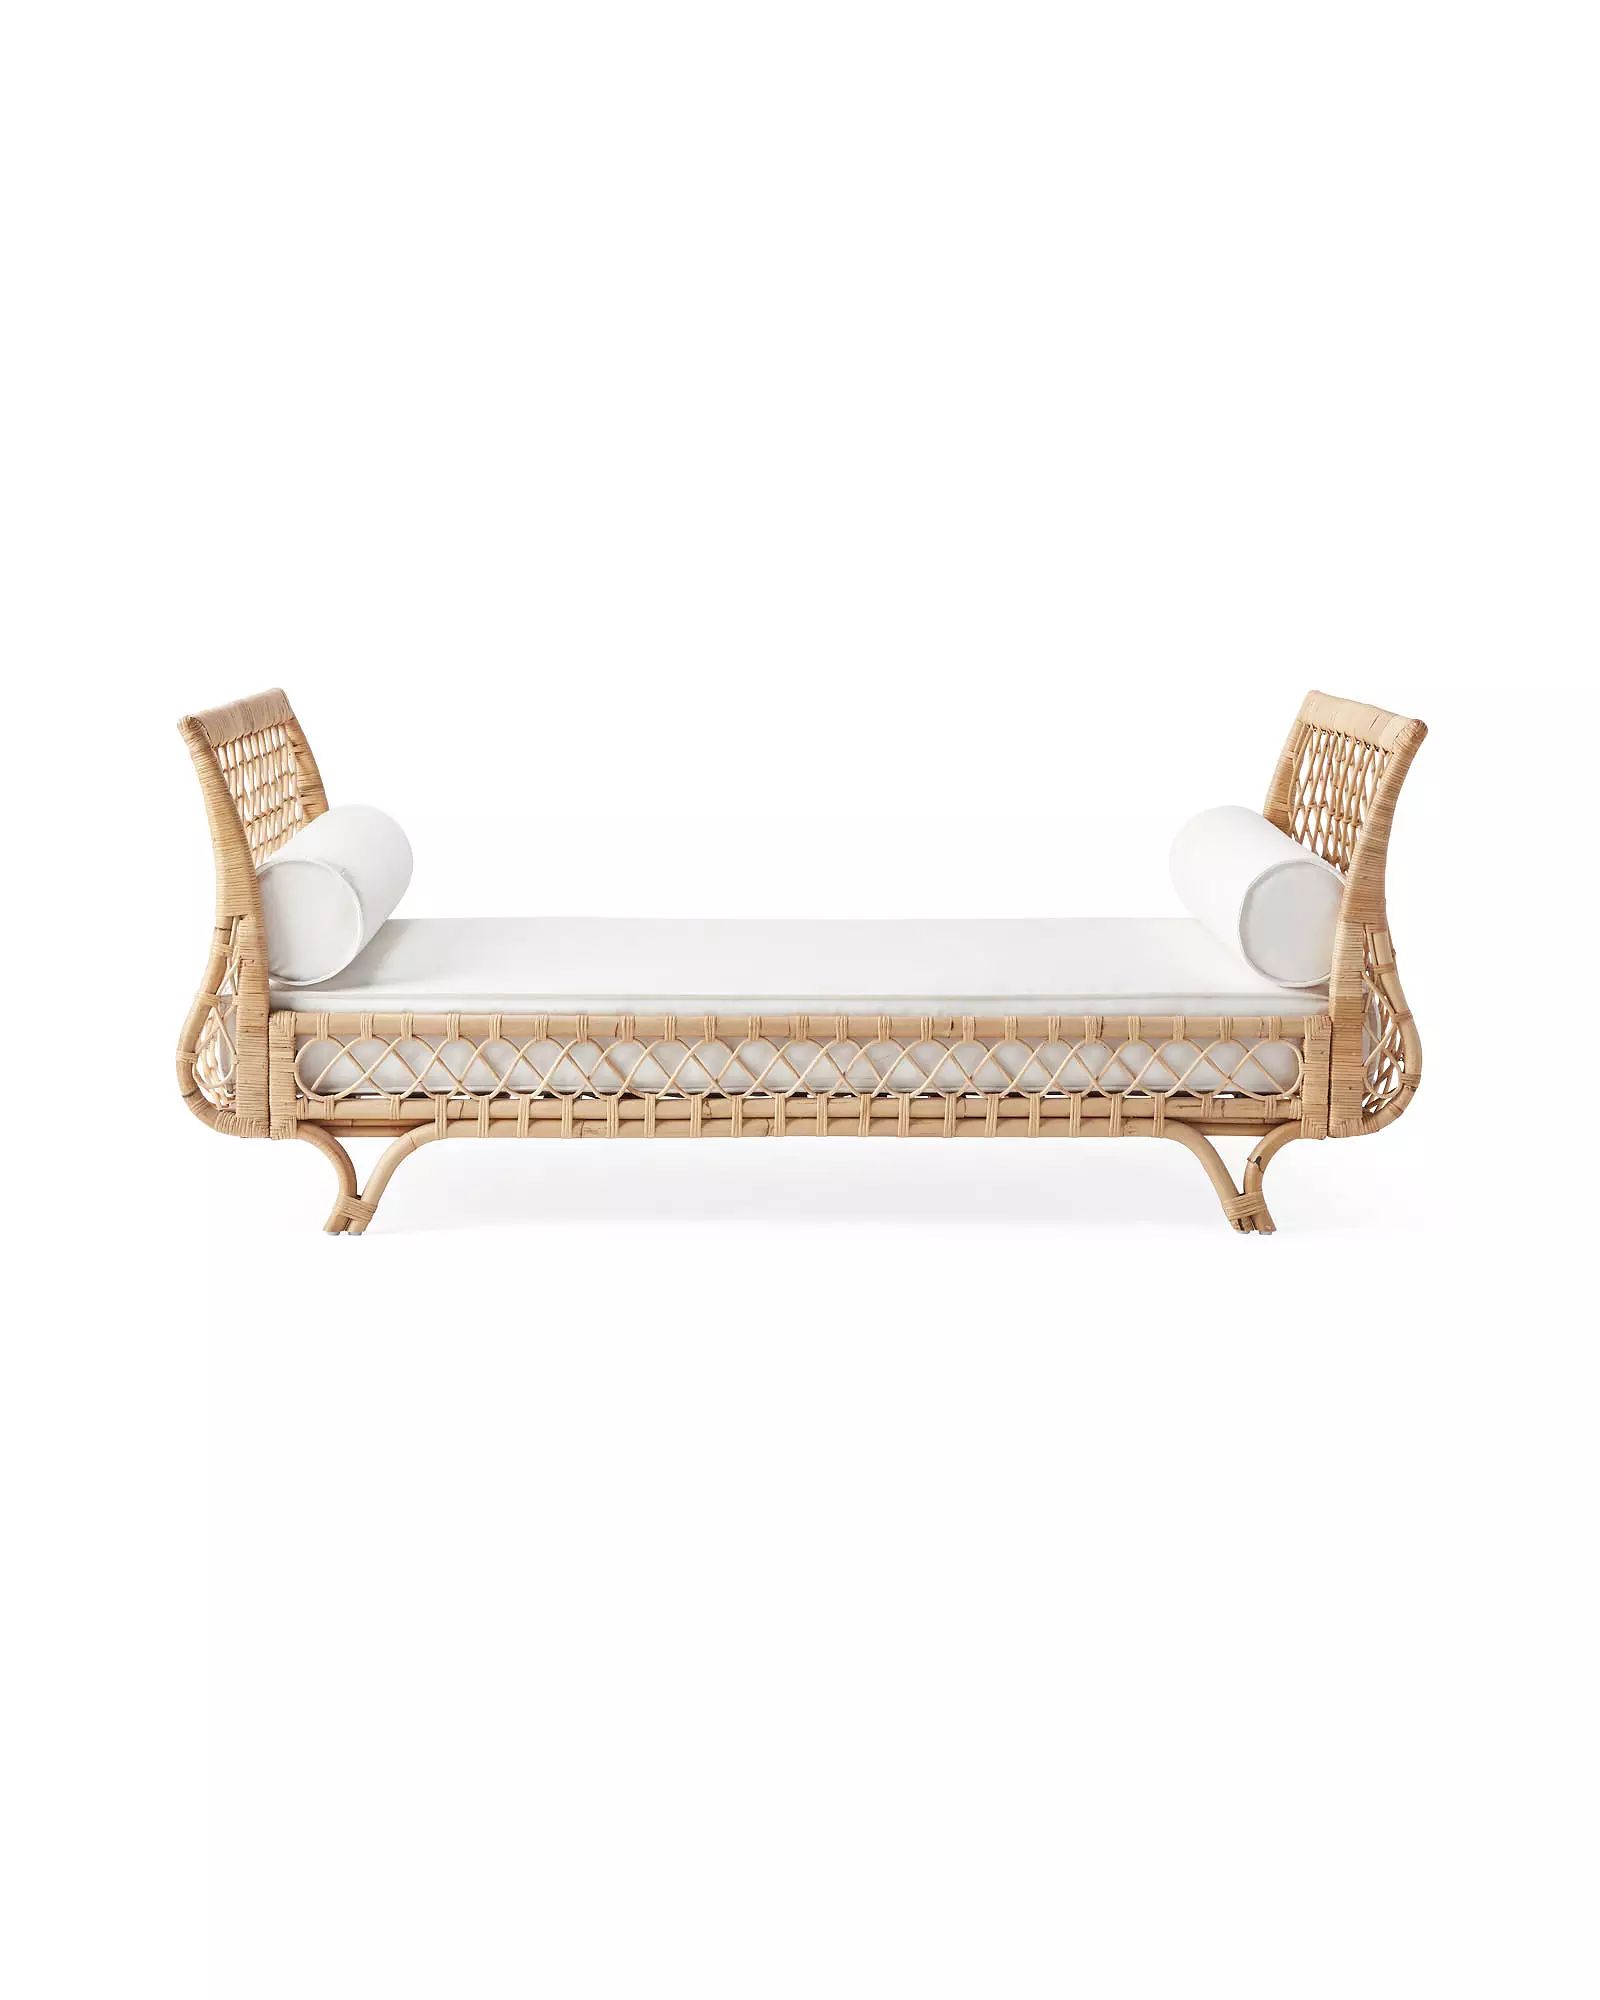 Avalon Rattan Daybed | Serena and Lily